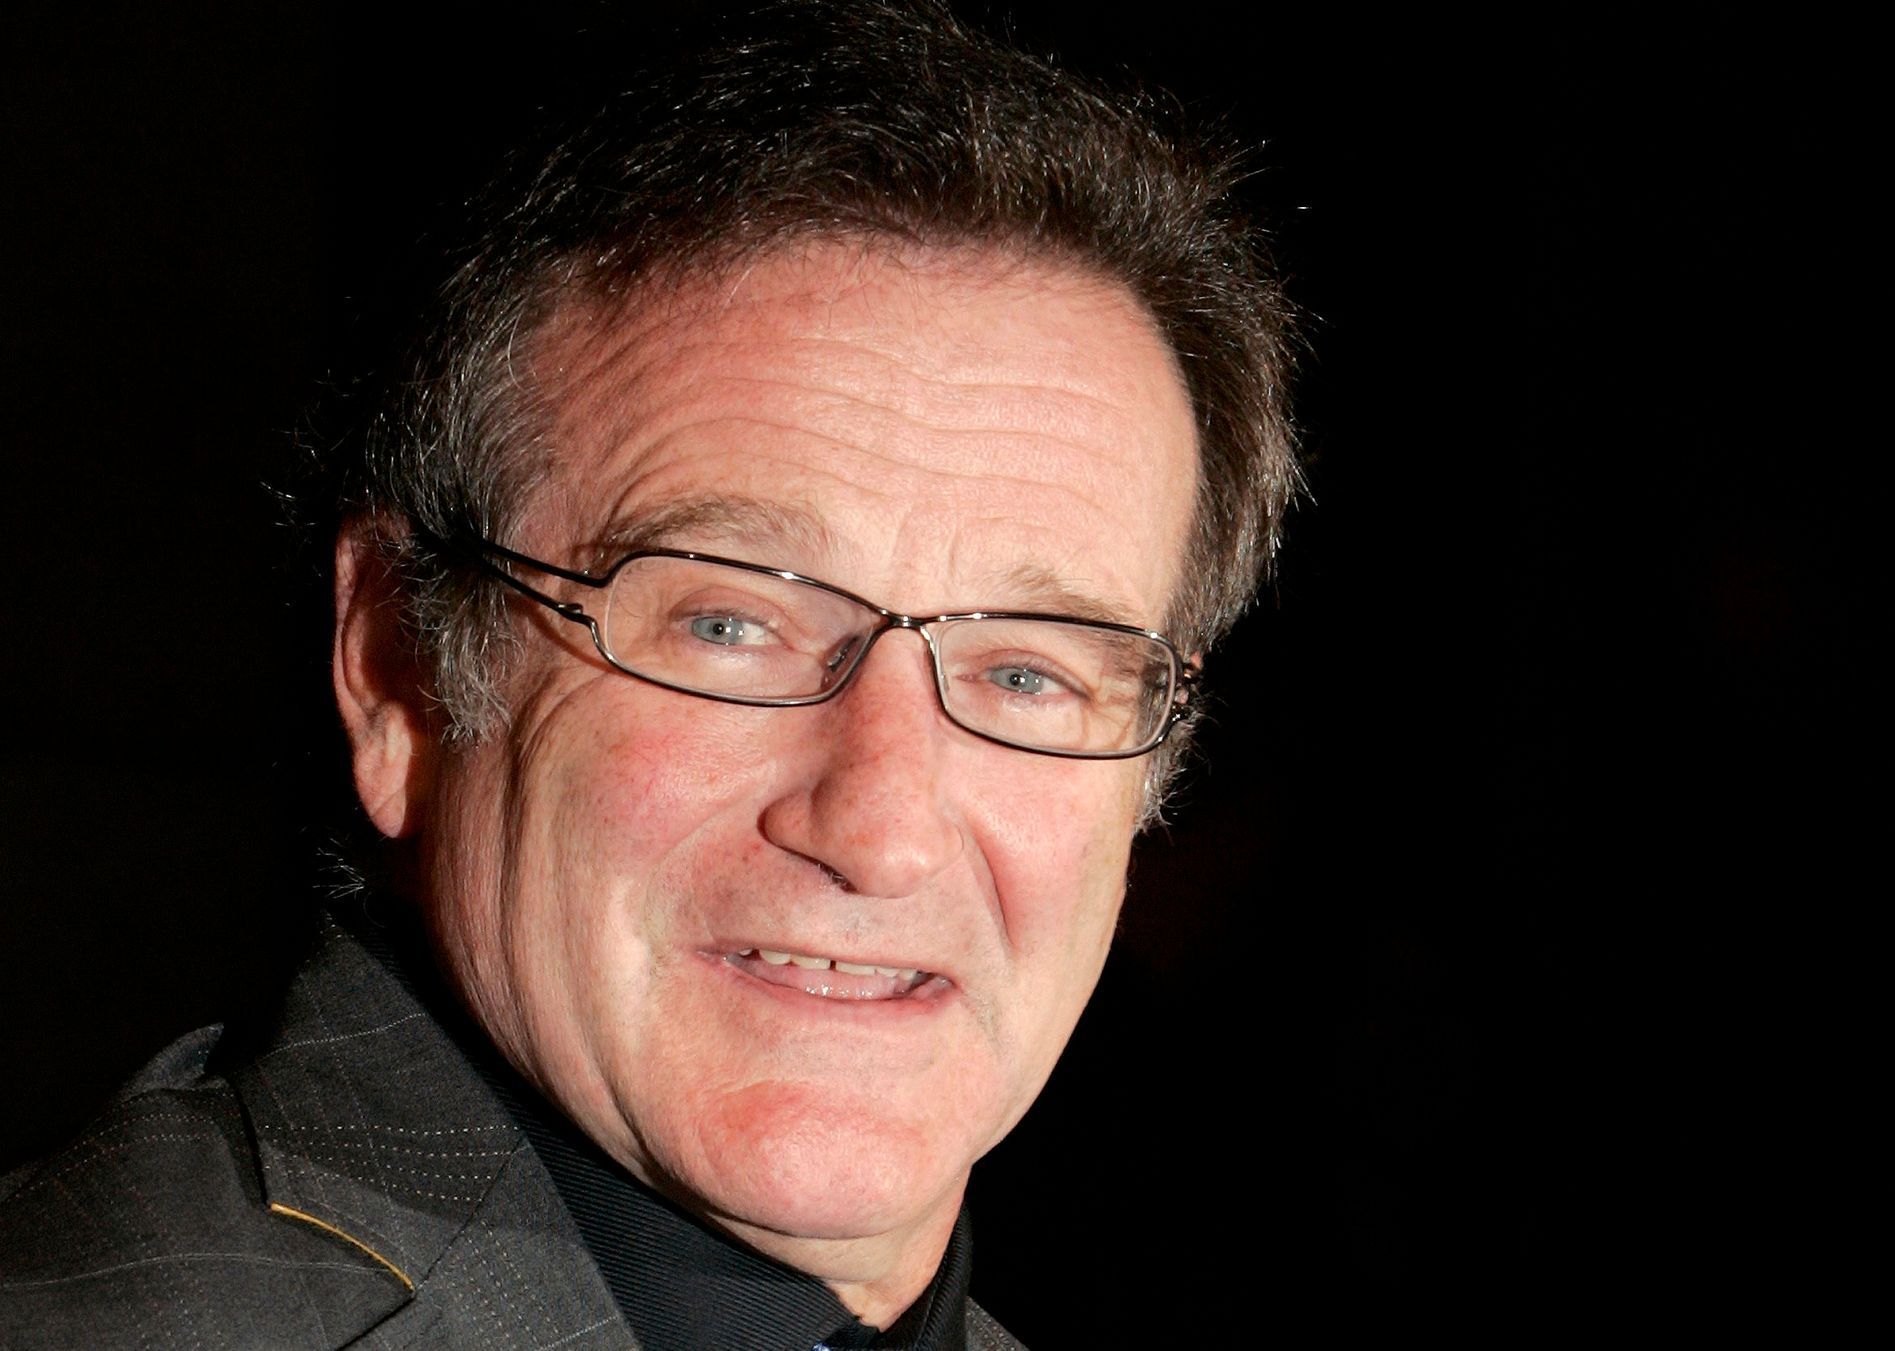 File photo of actor Robin Williams arriving to attend 2006 New York Film Critics Circle Awards  in New York